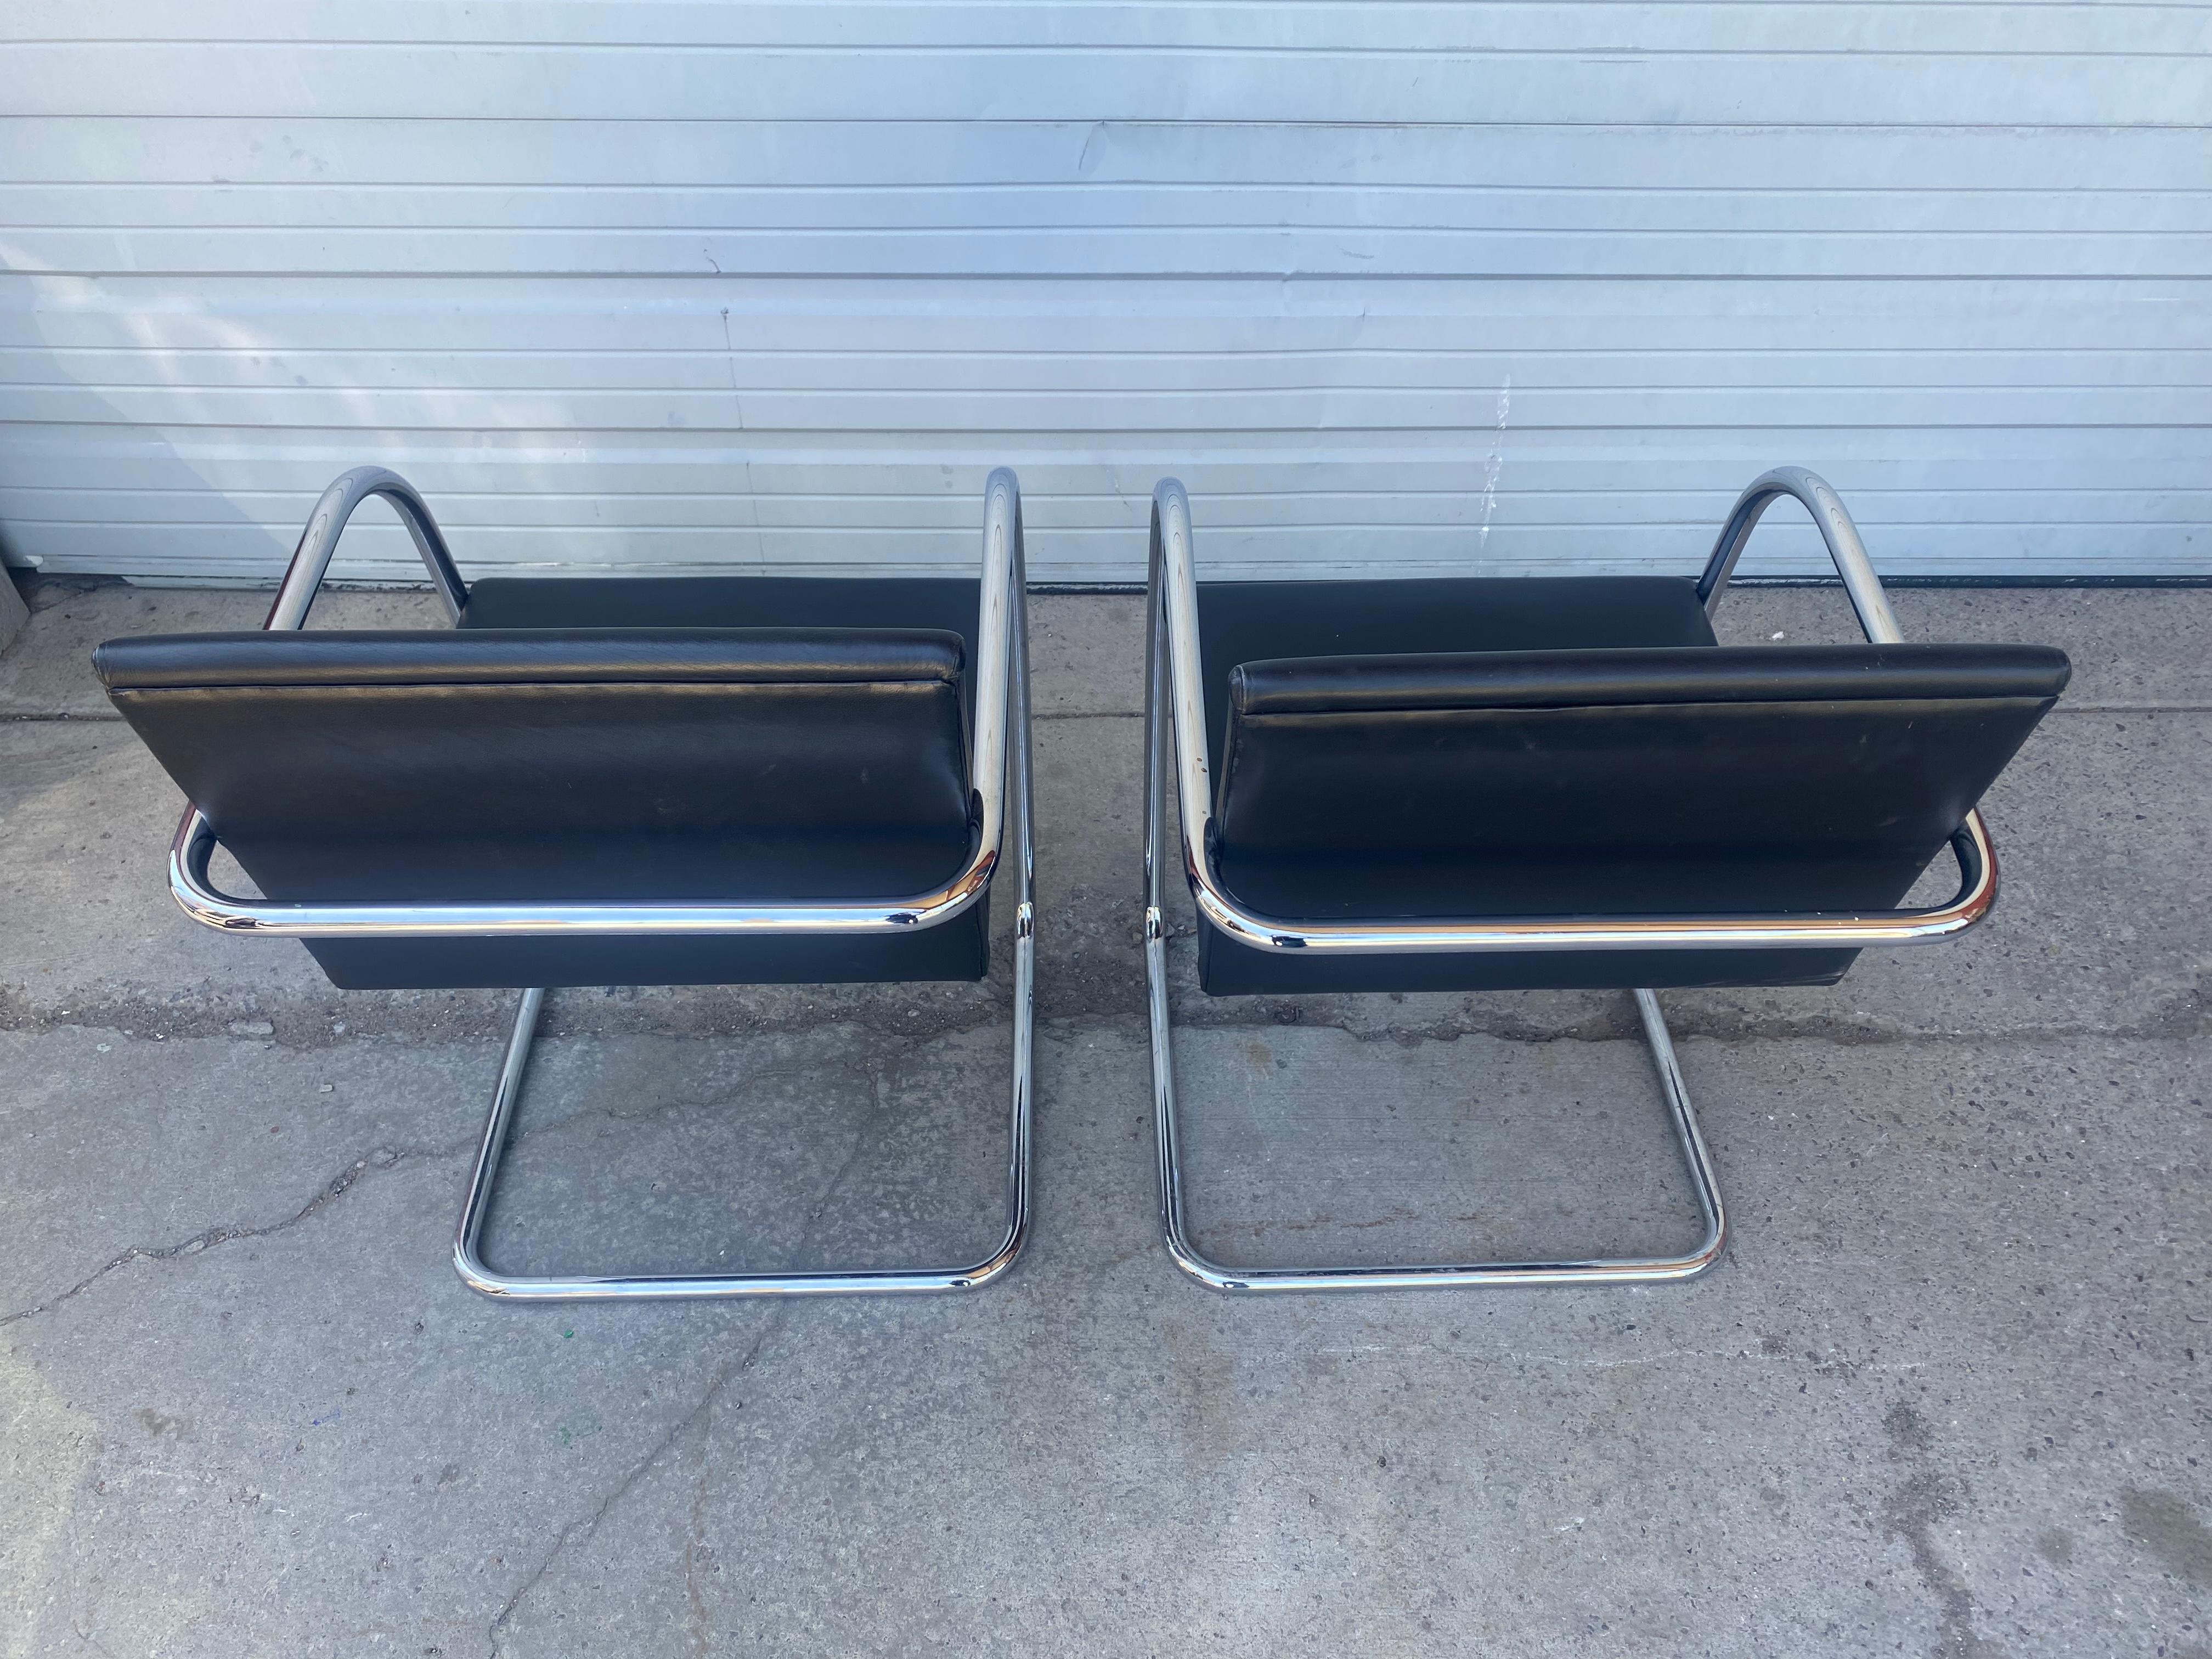 
Classic set of 6 Brno Chairs made by Knoll Studios,, Wonderfull Black leather and polished Chrome..Extremely comfortable,,, Retain original Knoll labels as well as impressed marke to steel (under arms) Hand delivery avail to New York City or